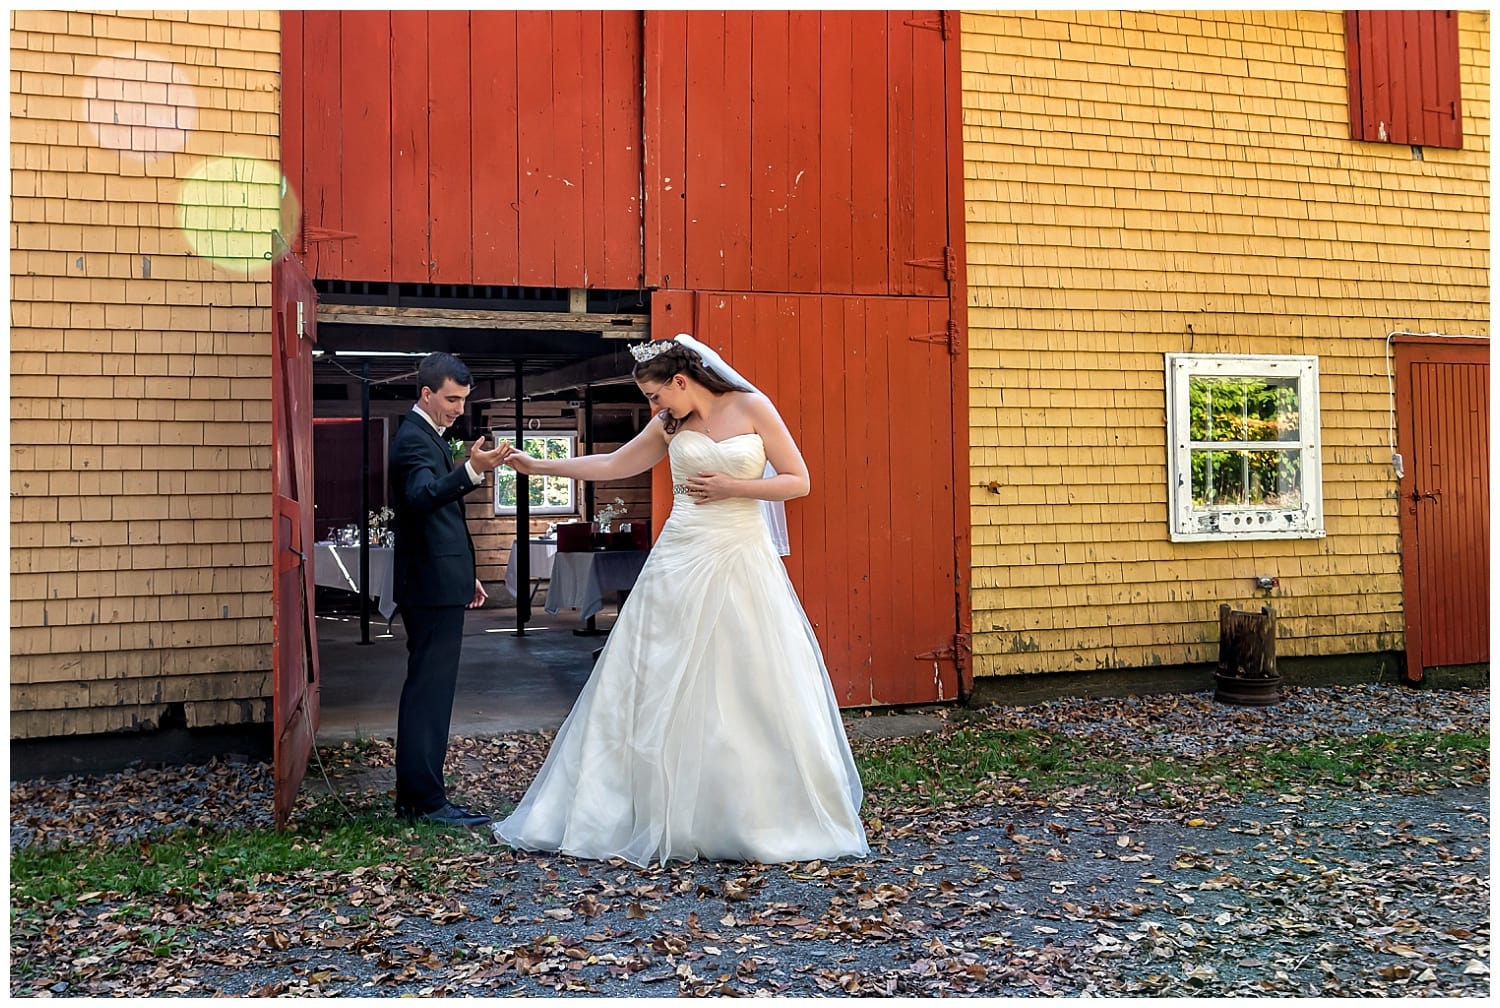 The groom eyes up the bride's gown during a rustic first look at the barn on Kinley Farm in Lunenburg NS.